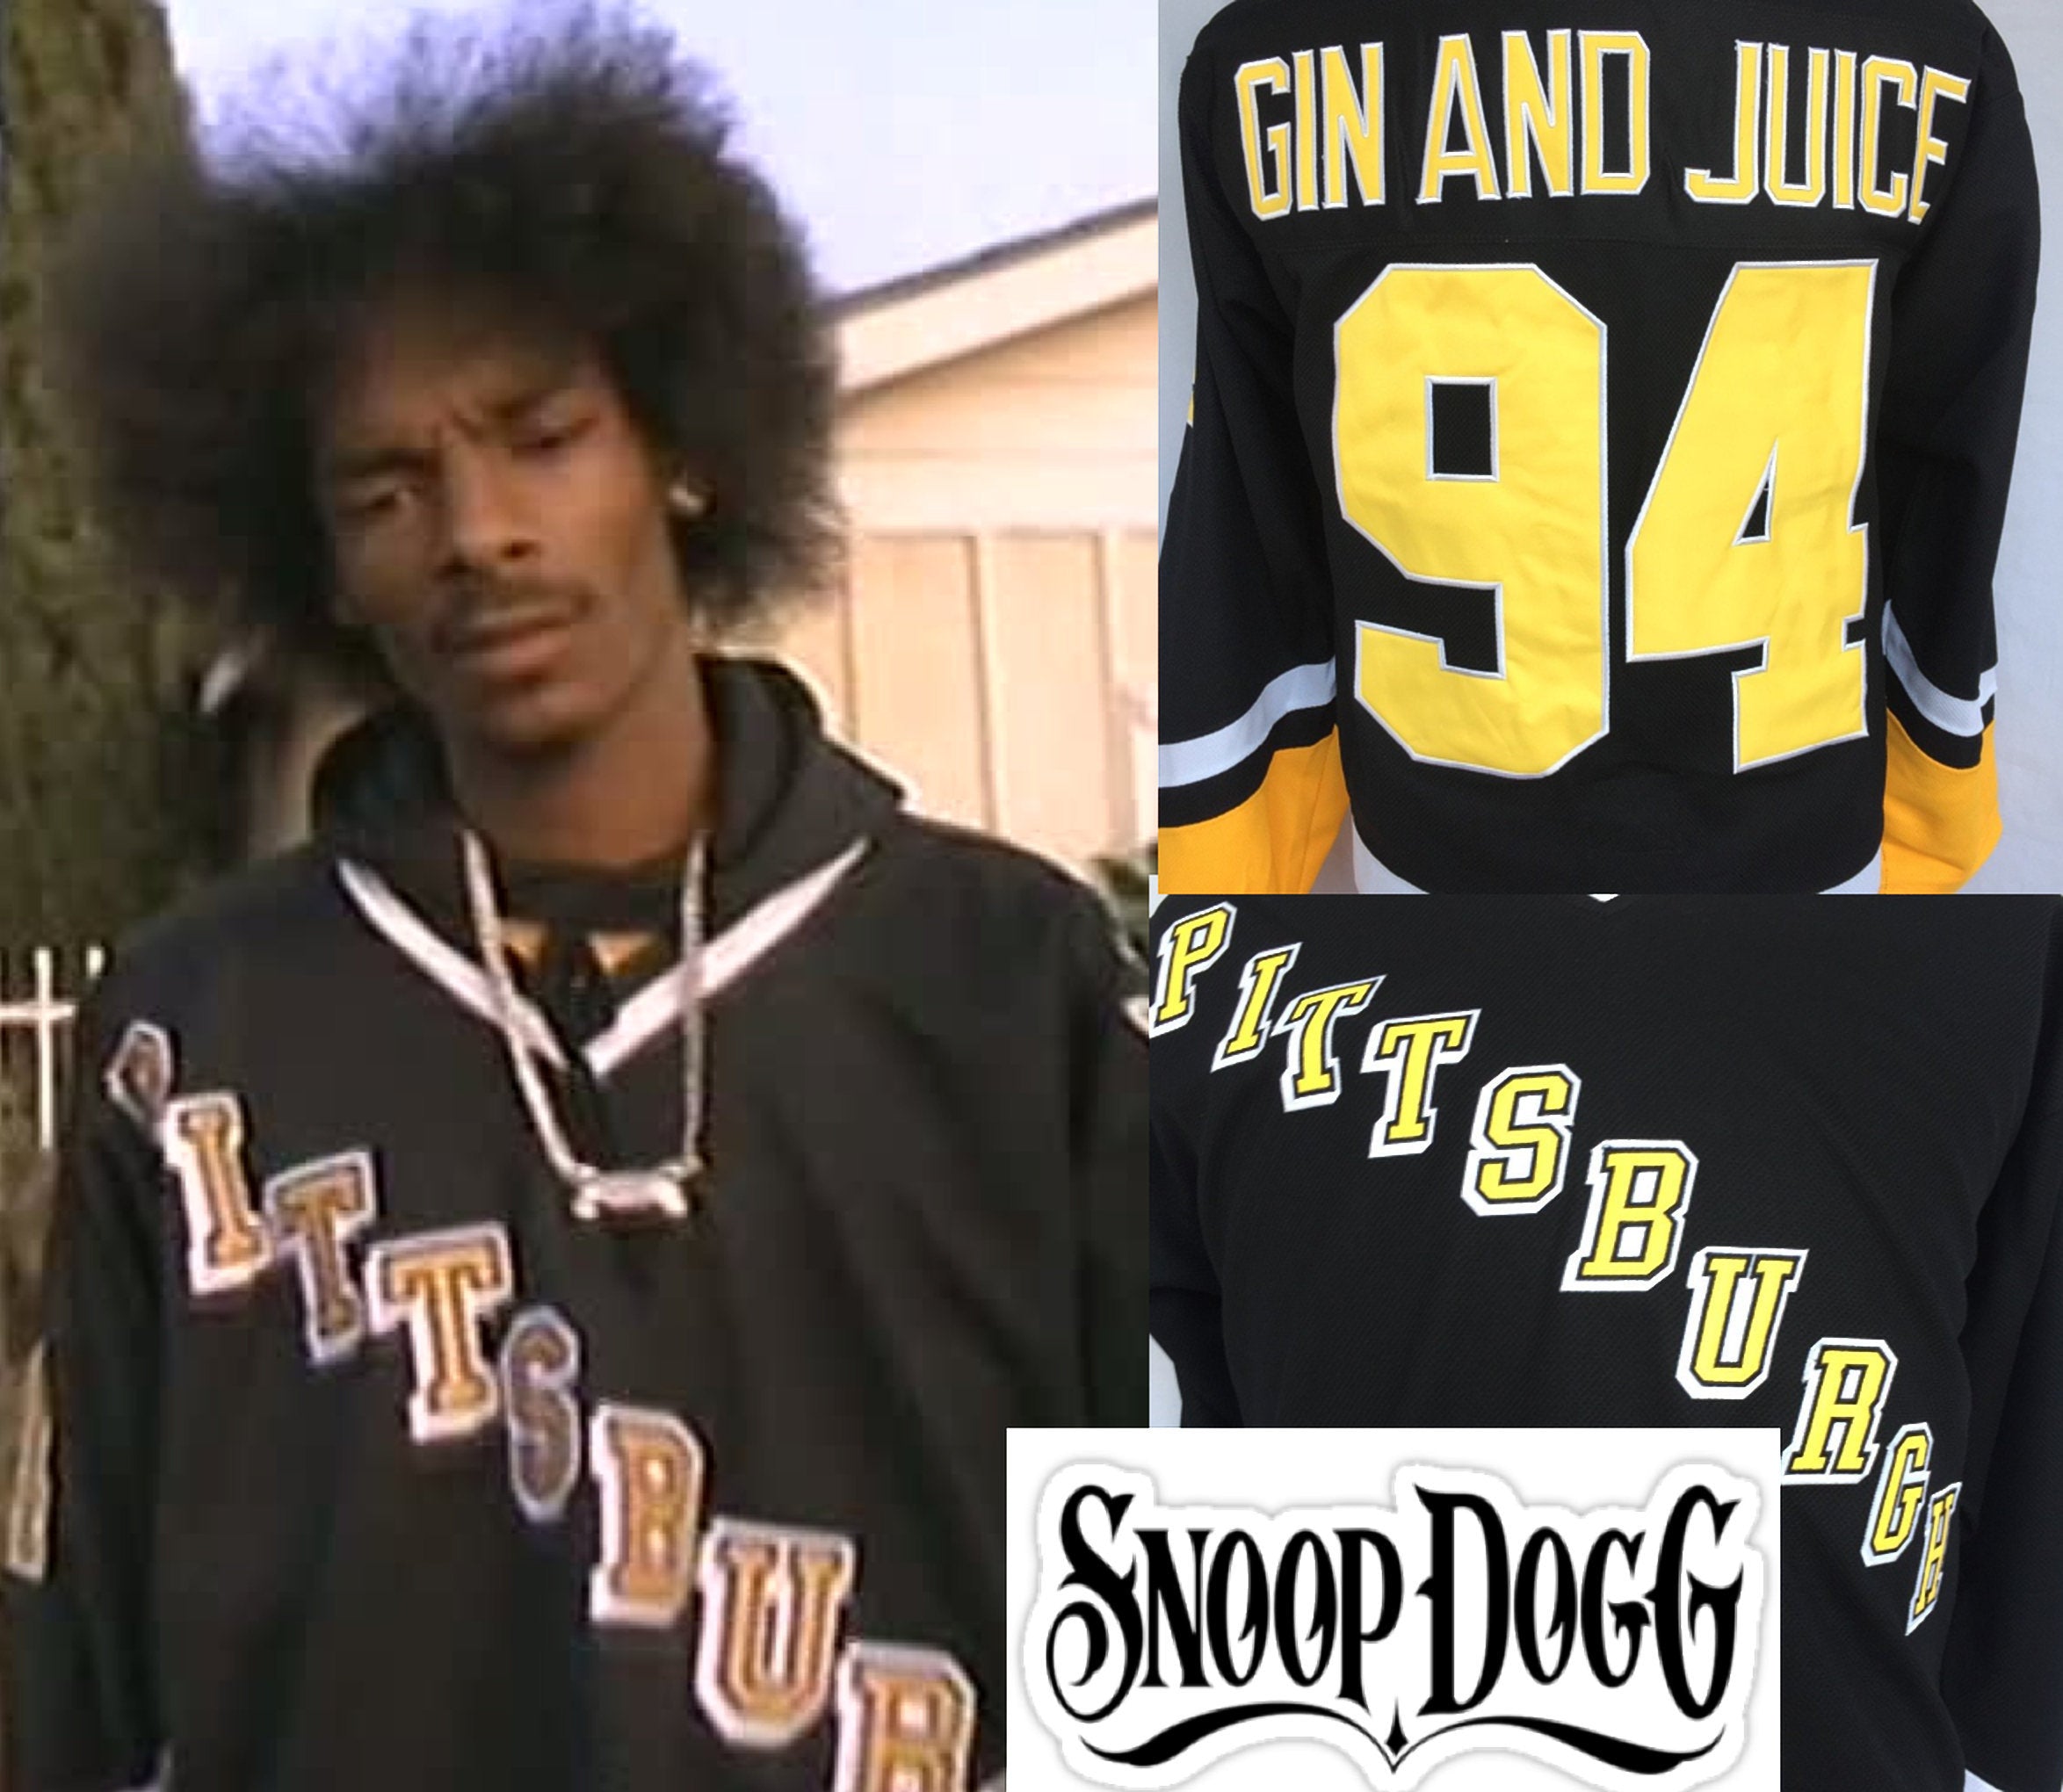 Snoop Dogg Gin and Juice Jacket